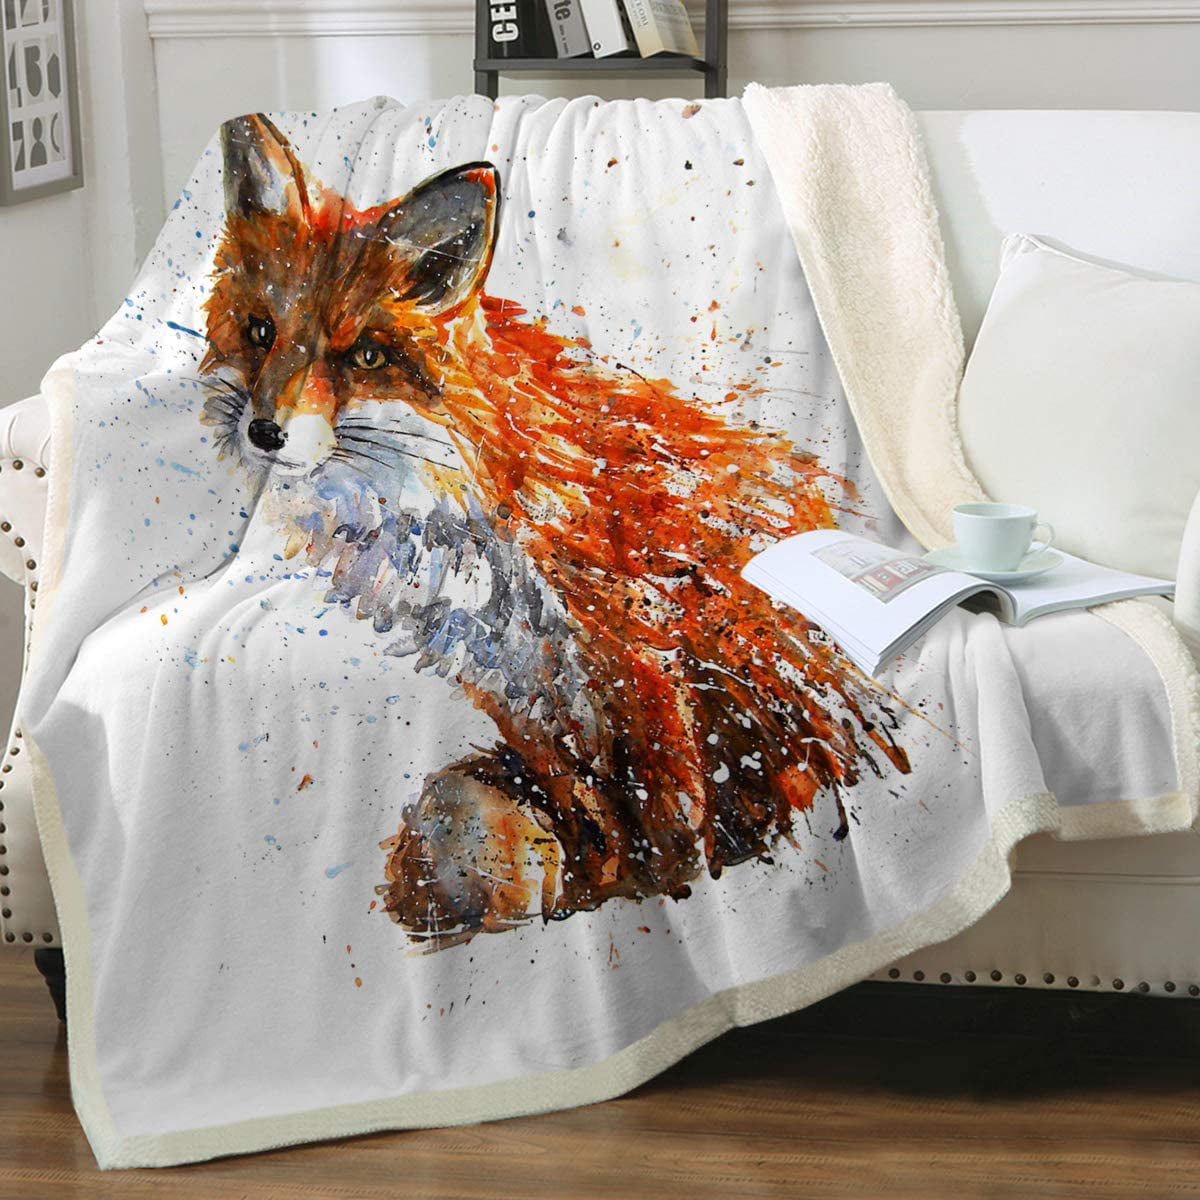 Flannel Blanket Cute Fox Deer Lightweight Cozy Bed Blanket Soft Throw Blanket fits Couch Sofa Suitable for All Season for Kids Women Men 60x80 inches 